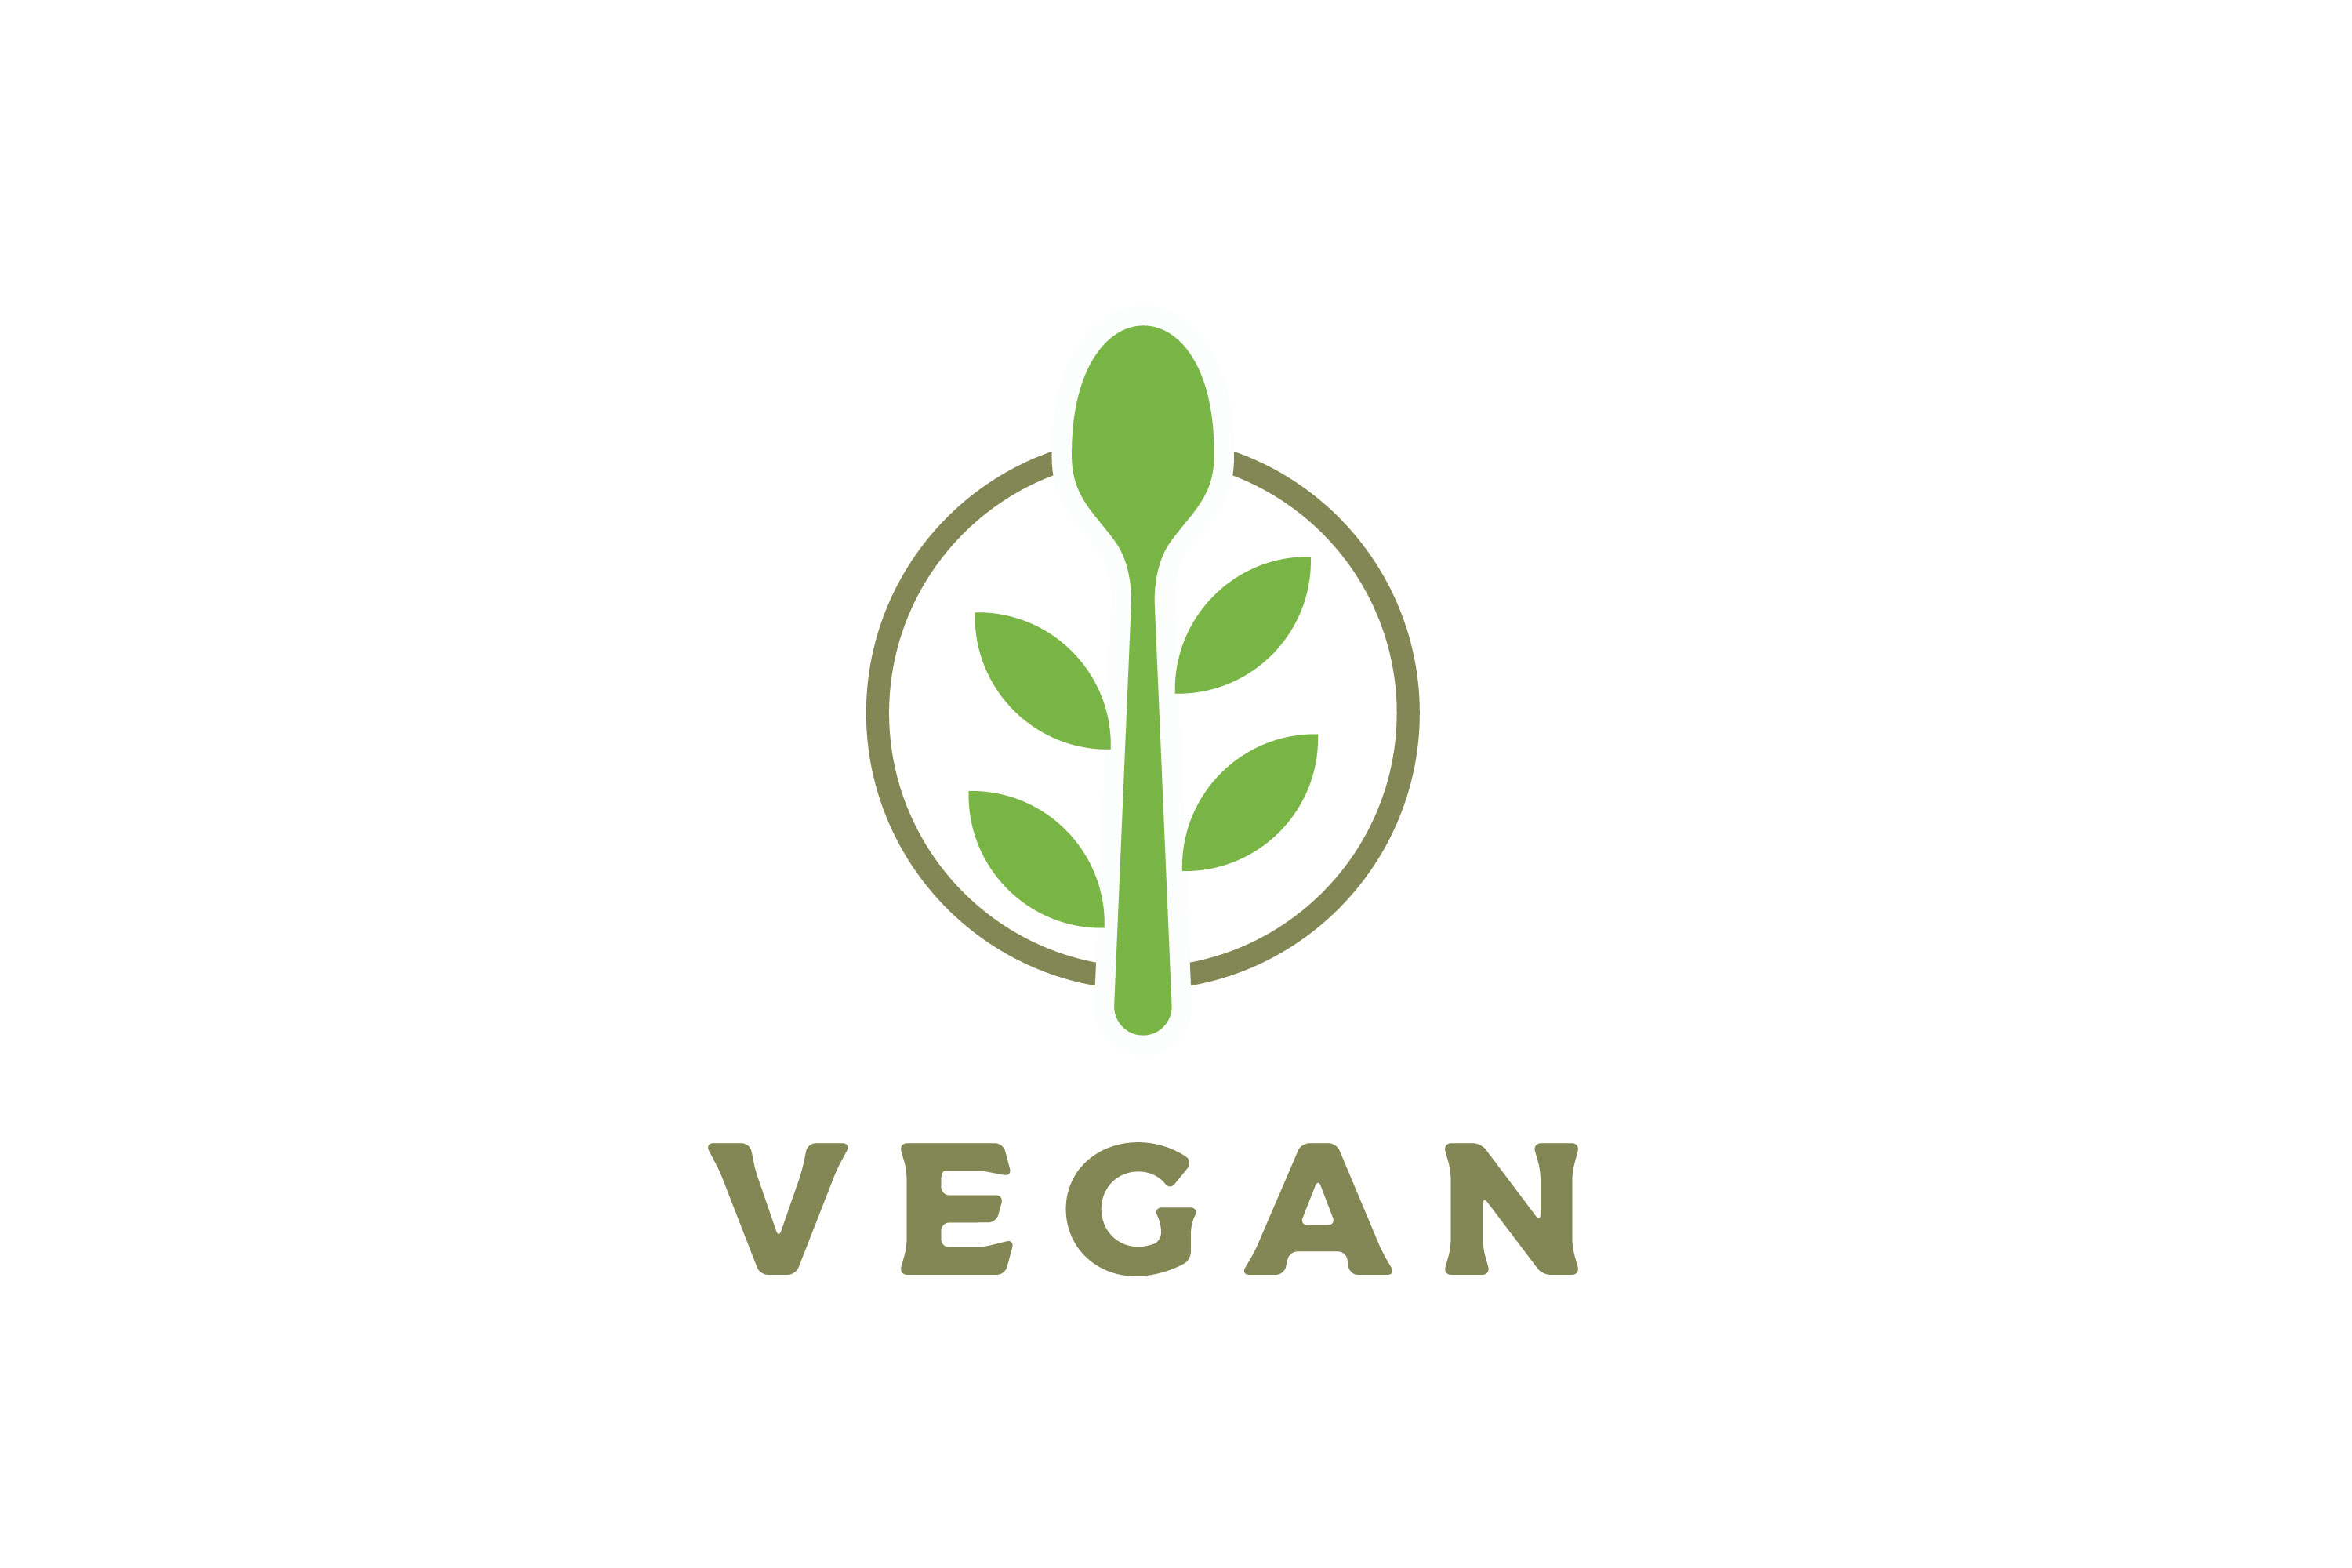 Spoon and Leaf for Vegan, Nature Logo Graphic by Weasley99 · Creative ...